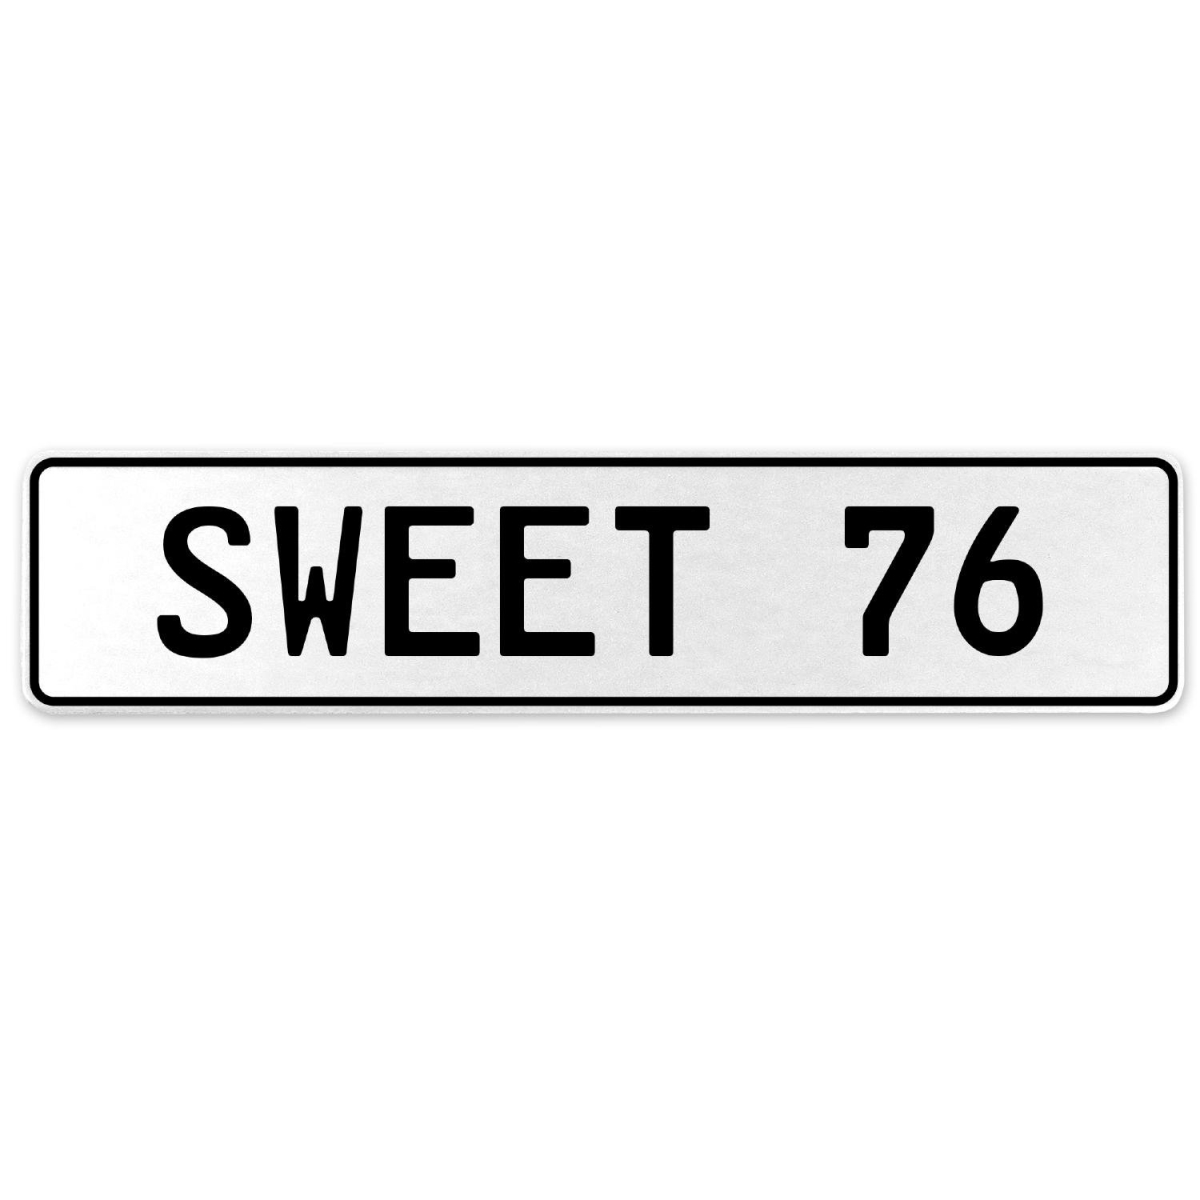 554178 Sweet 76 - White Aluminum Street Sign Mancave Euro Plate Name Door Sign Wall